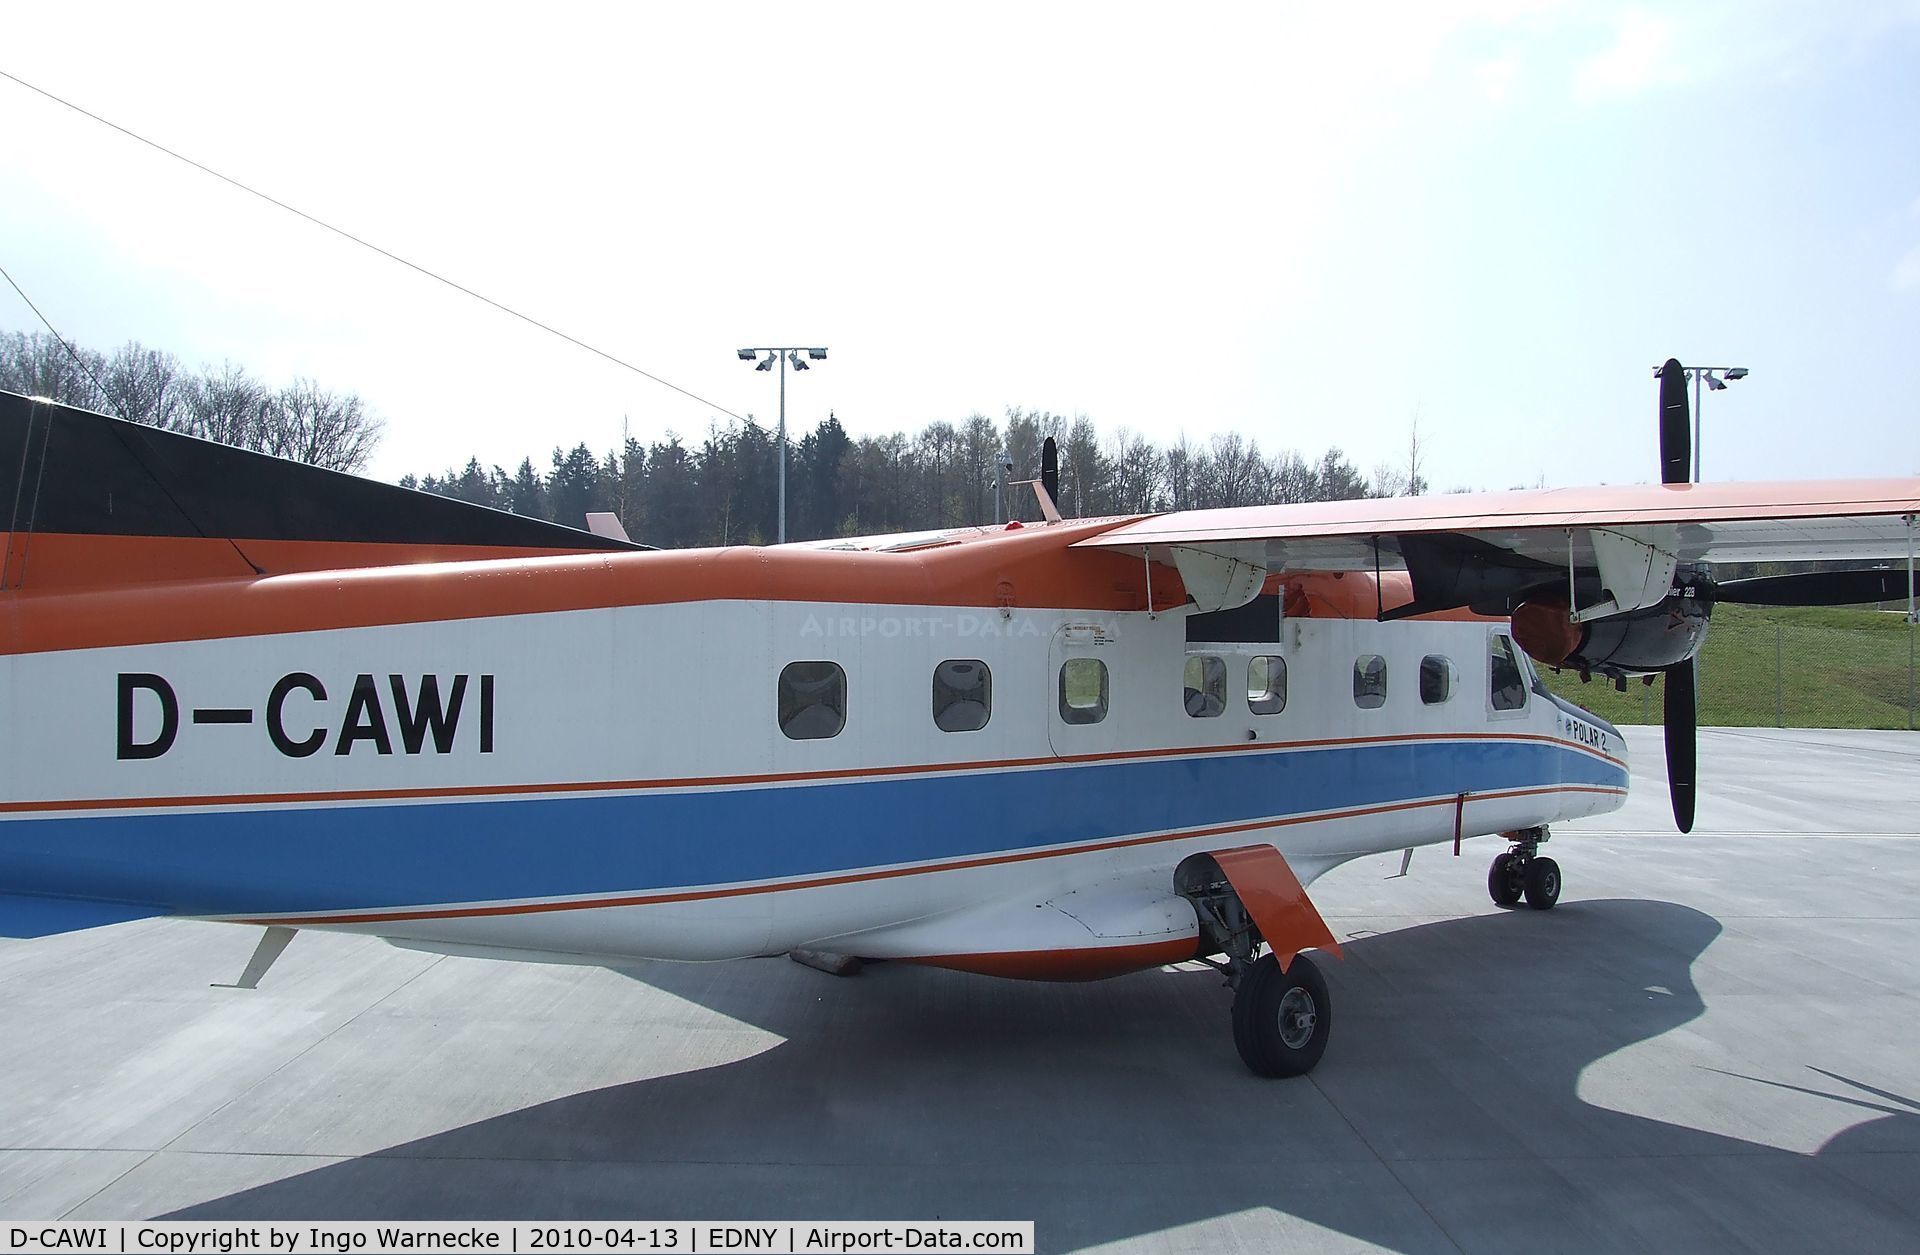 D-CAWI, 1983 Dornier 228-101 C/N 7014, Dornier Do 228-101 (formerly 'POLAR 2' operated by the German polar research institute (Alfred Wegener Institut)) standing outside the Dornier-Museum to be sold in May 2010. Before it had been exhibited at the Dornier Museum for some months.